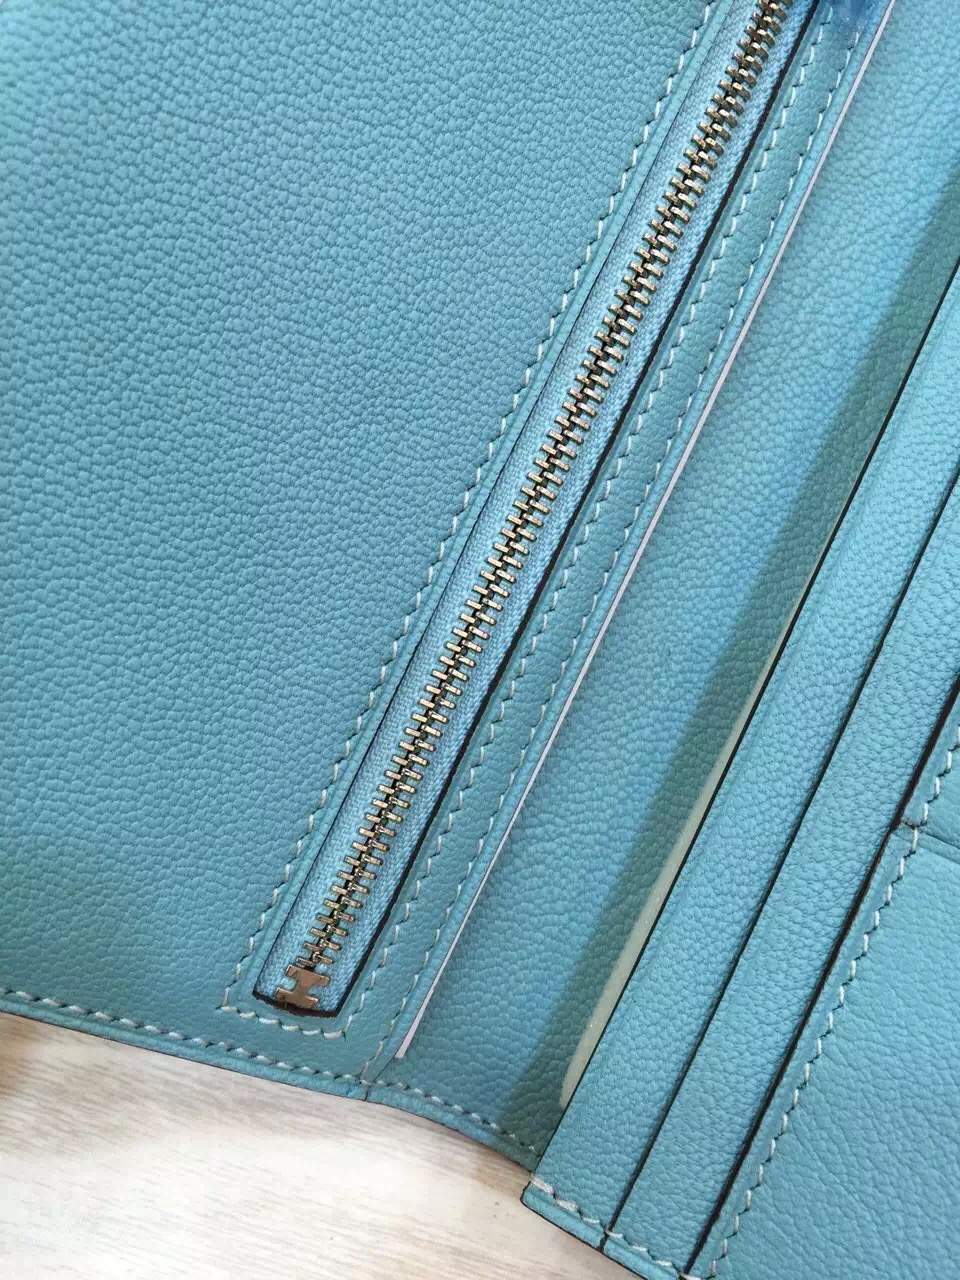 Hand Stitching Hermes Epsom Leather Bearn Wallet Clutch Bag in Lagon Blue